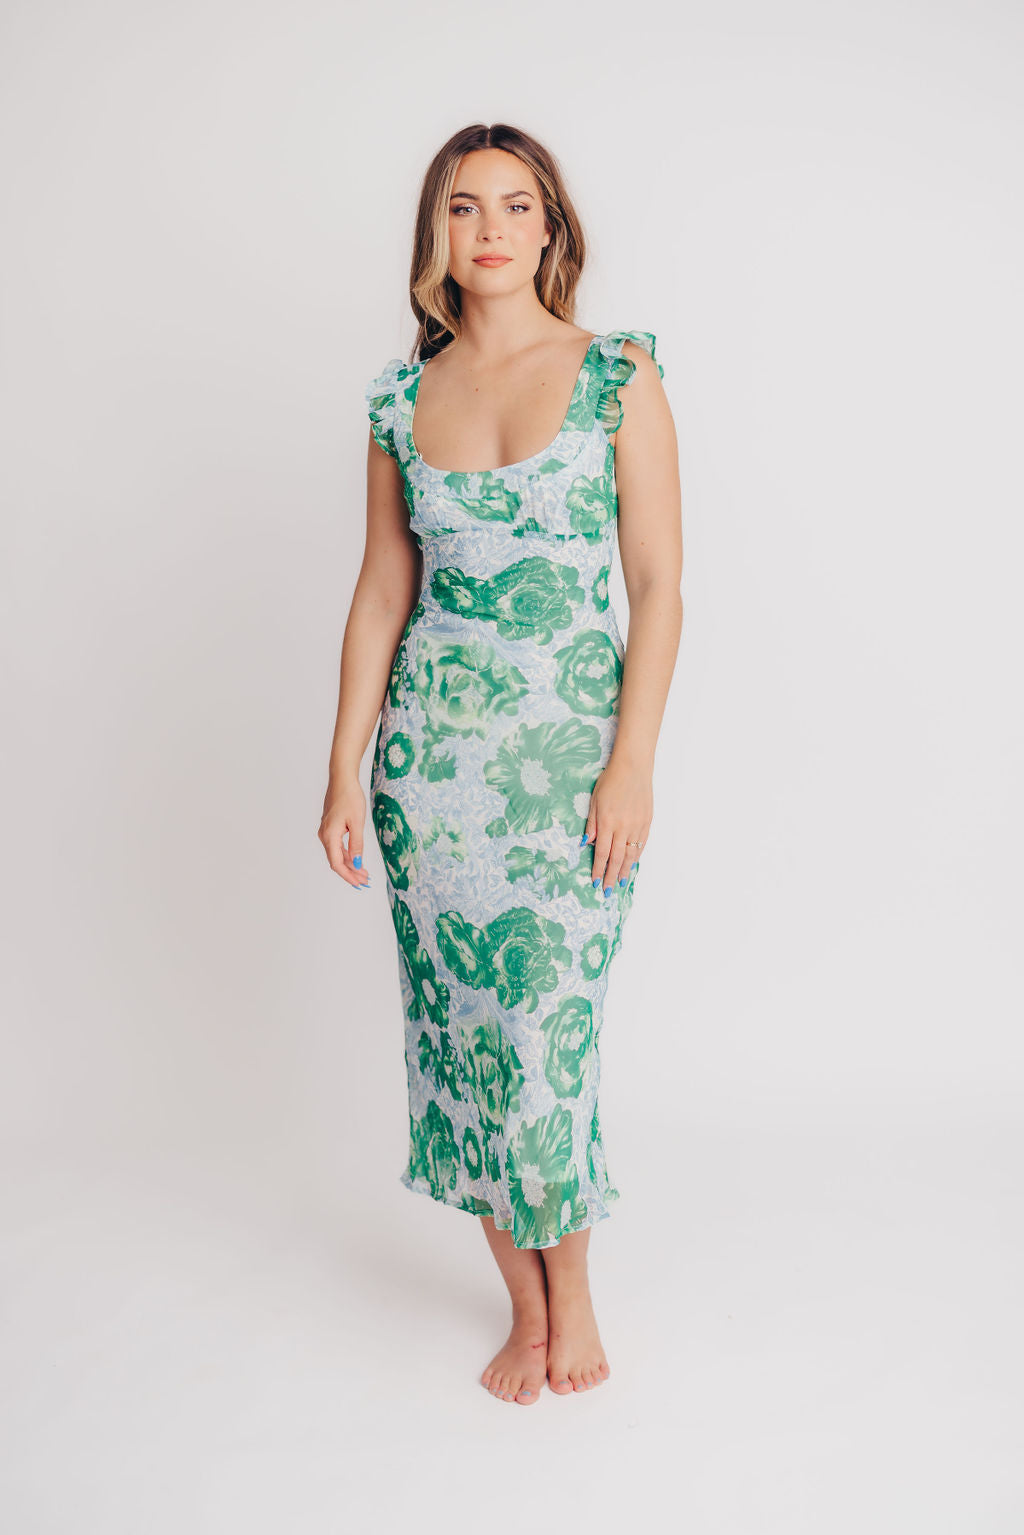 Pisa Floral Chiffon Midi Dress with Ruffle Shoulder in Green/Blue